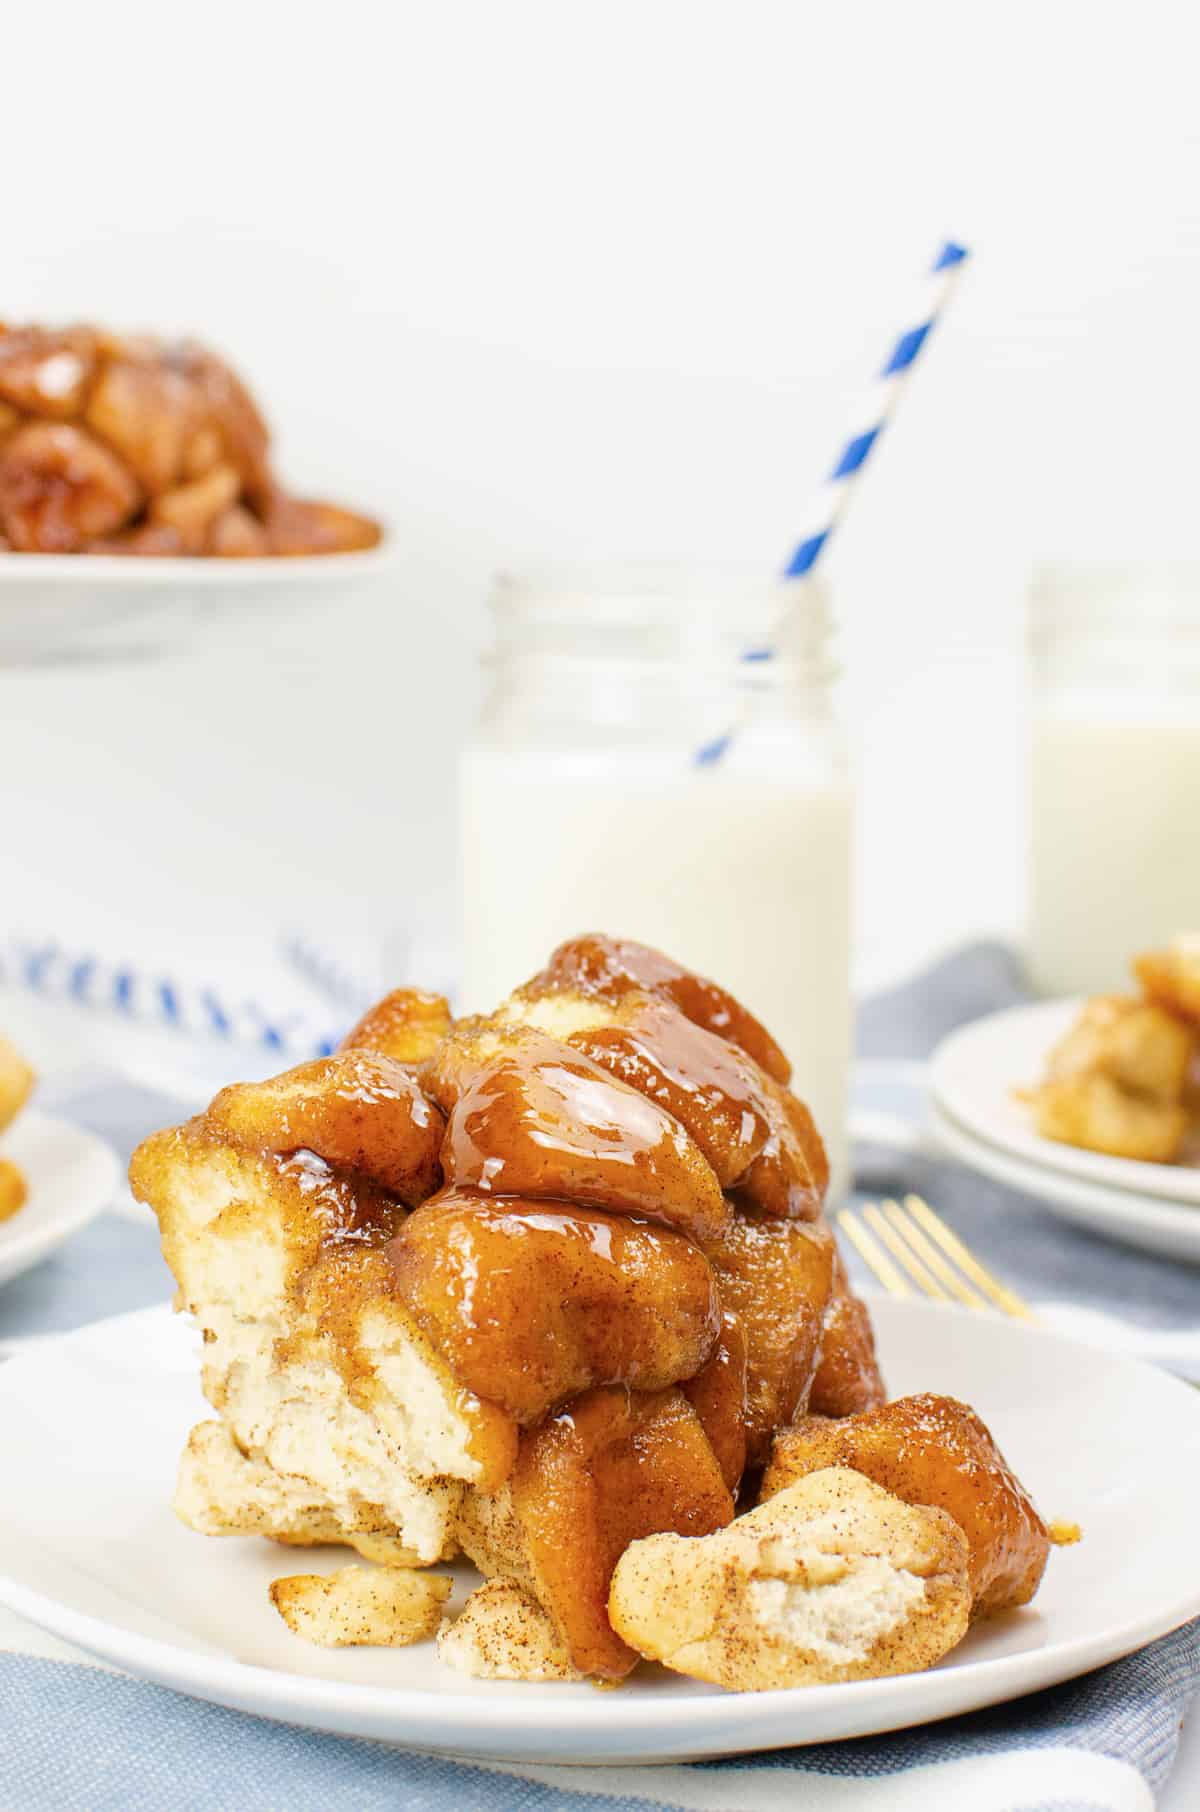 Cinnamon sugar monkey bread serving on white plate with whole monkey bread and glass of milk with straw in background.